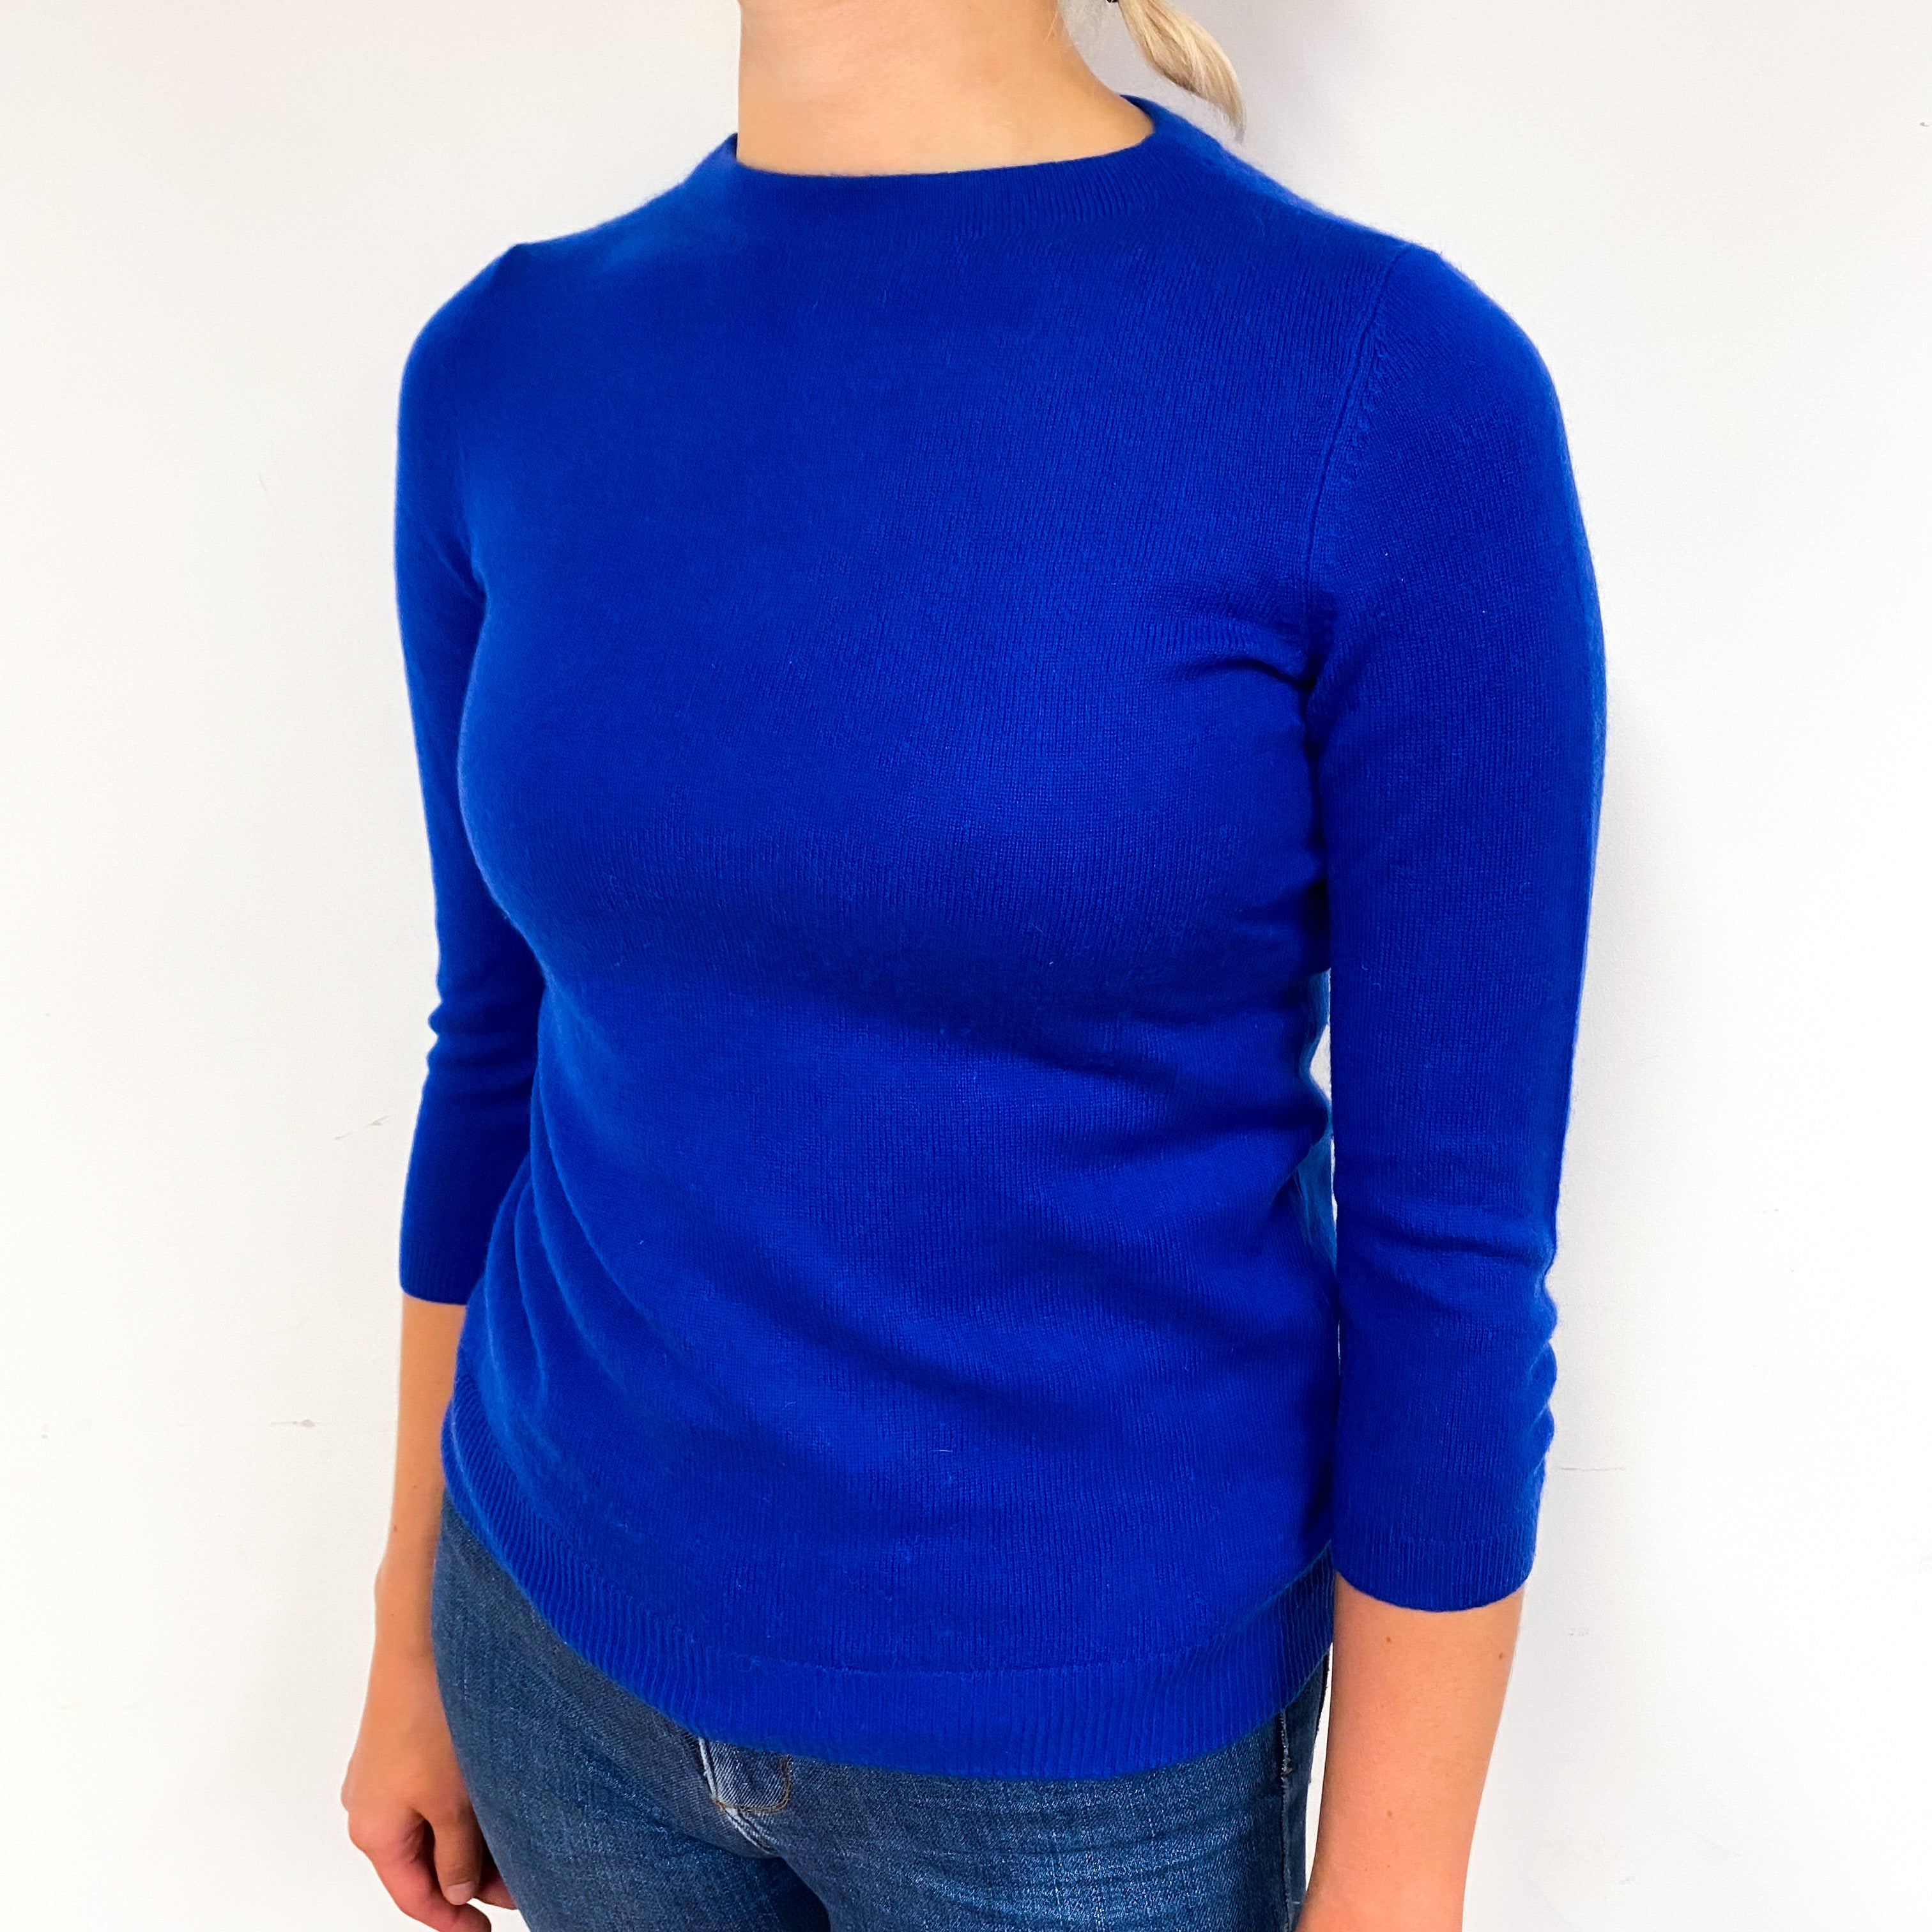 Admiral Blue 3/4 Sleeve Cashmere Crew Neck Jumper Small